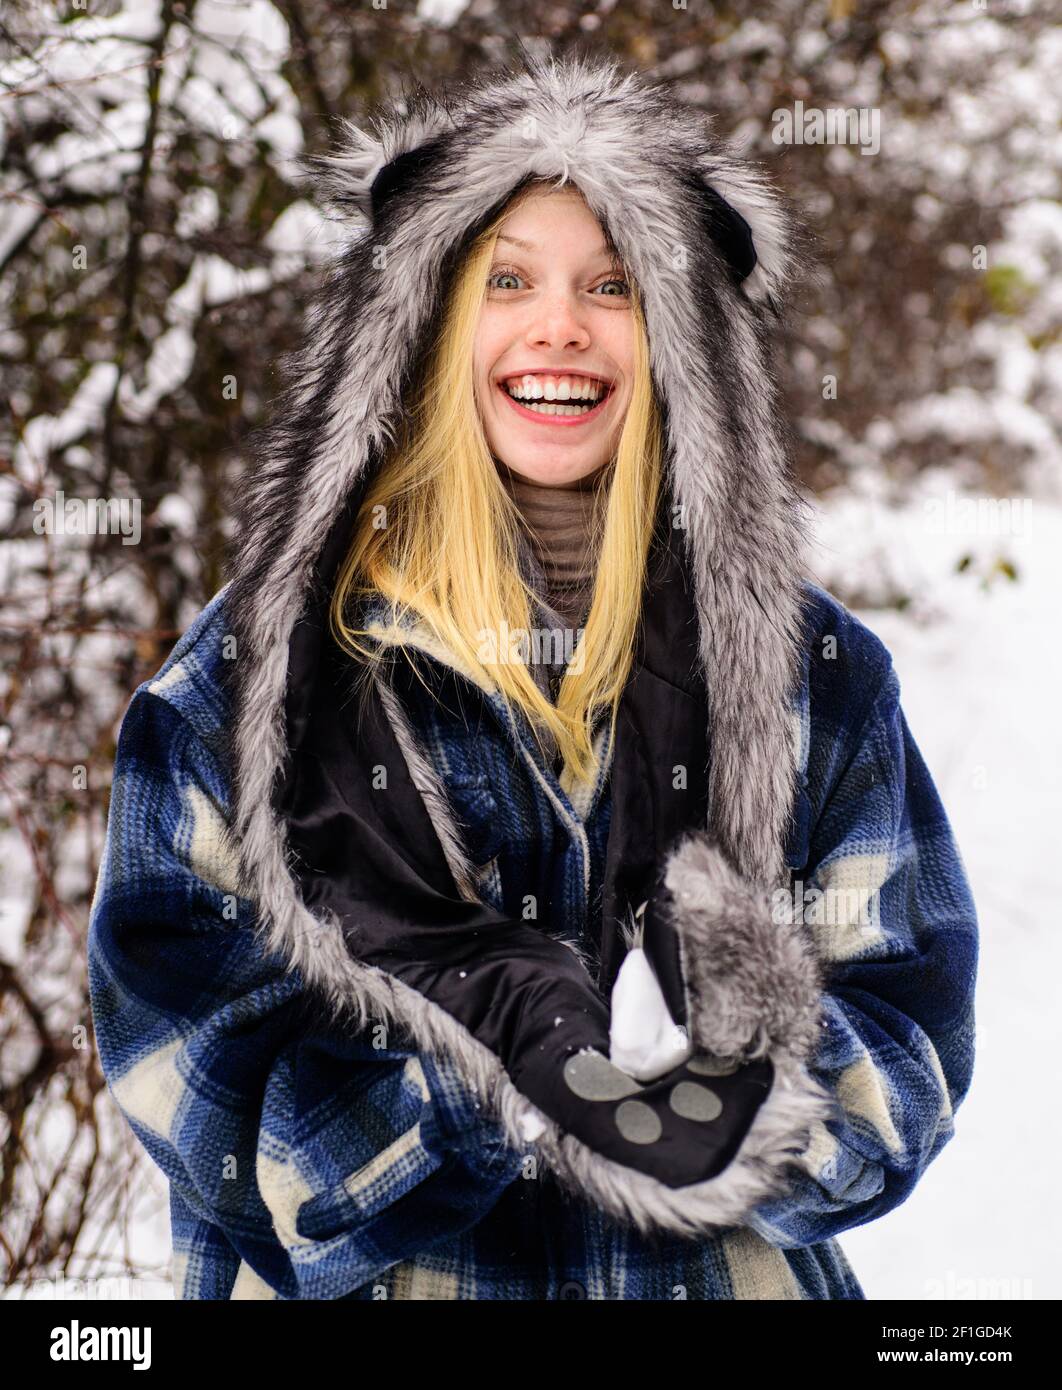 Wintertime. Smiling woman in warm clothing with snowball. Girl playing with snow. Season of winter. Stock Photo